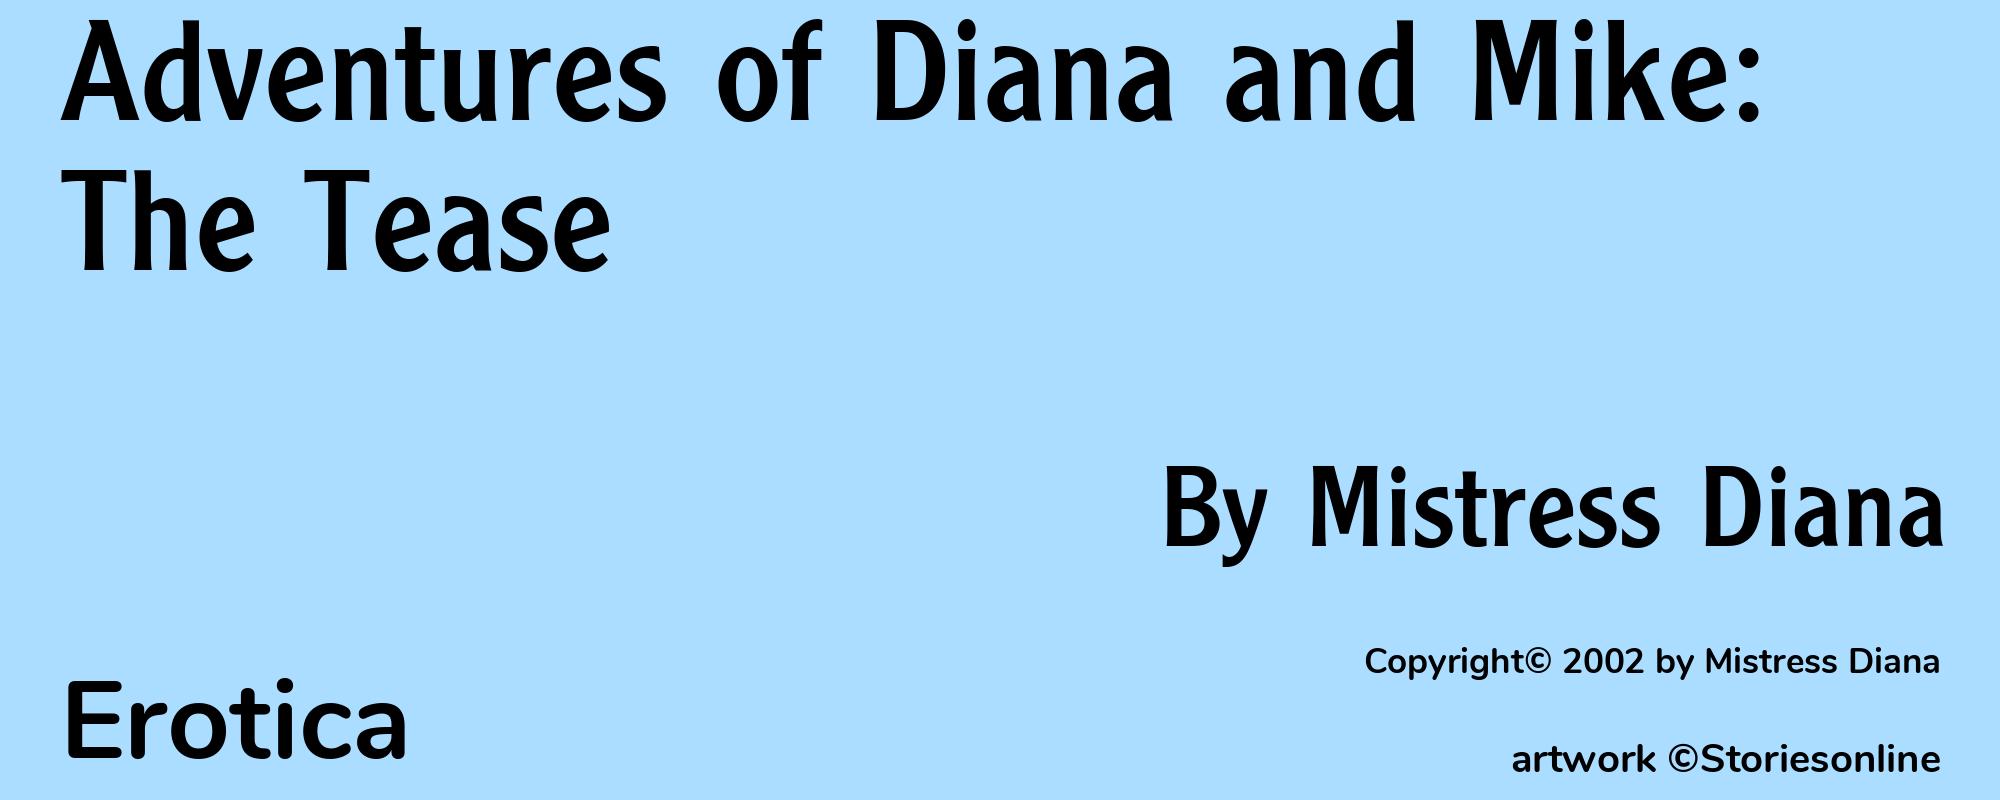 Adventures of Diana and Mike: The Tease - Cover